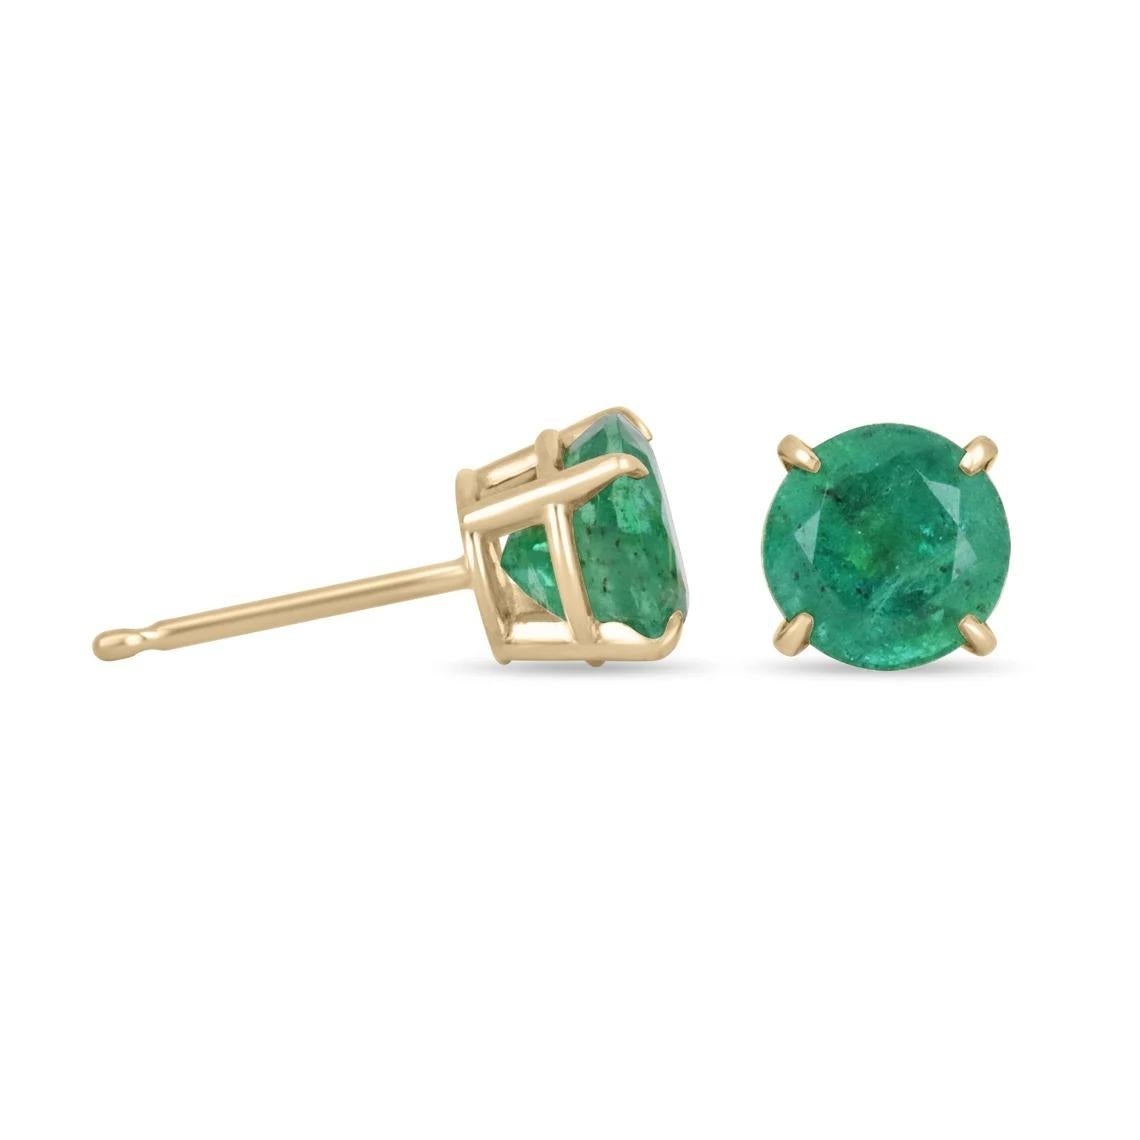 Featured here is a stunning set of round Zambian emerald studs in fine 14K gold. Displayed are rare, rich dark forest green emeralds with good transparency, accented by a hand-crafted four-prong gold mount, allowing for the emerald to be shown in